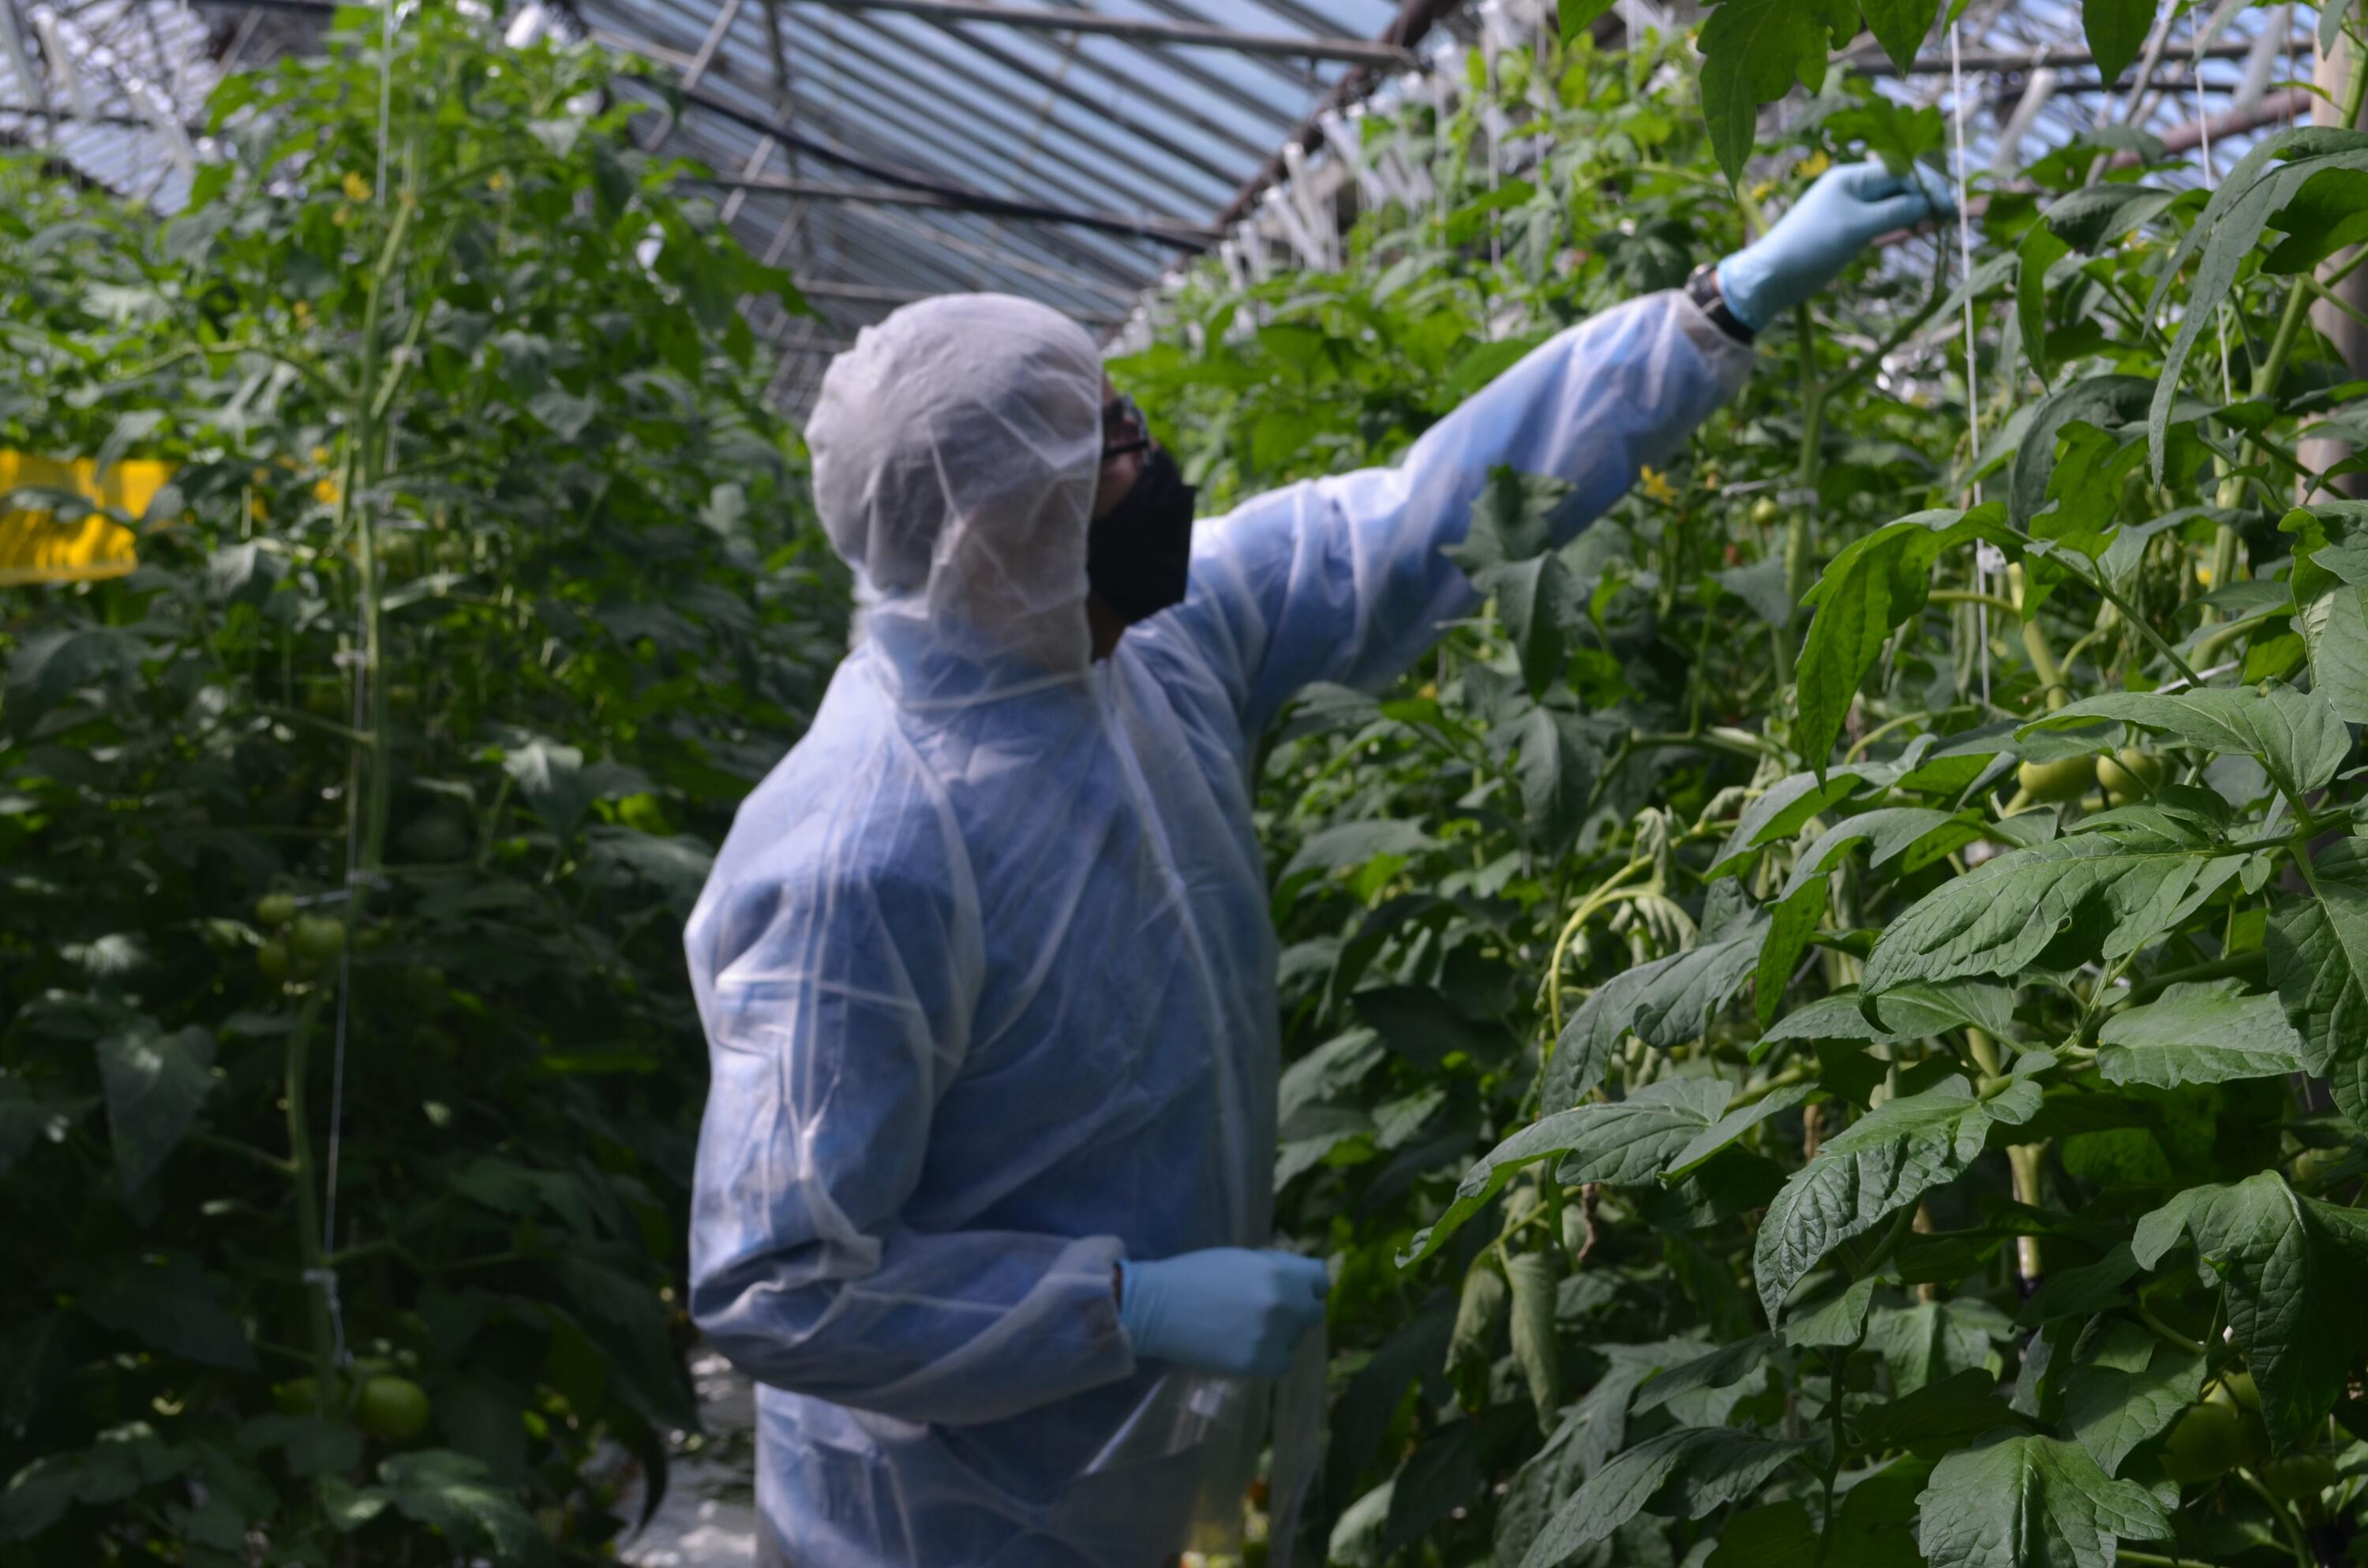 University of Waterloo professor Trevor Charles studying microbiome in a greenhouse